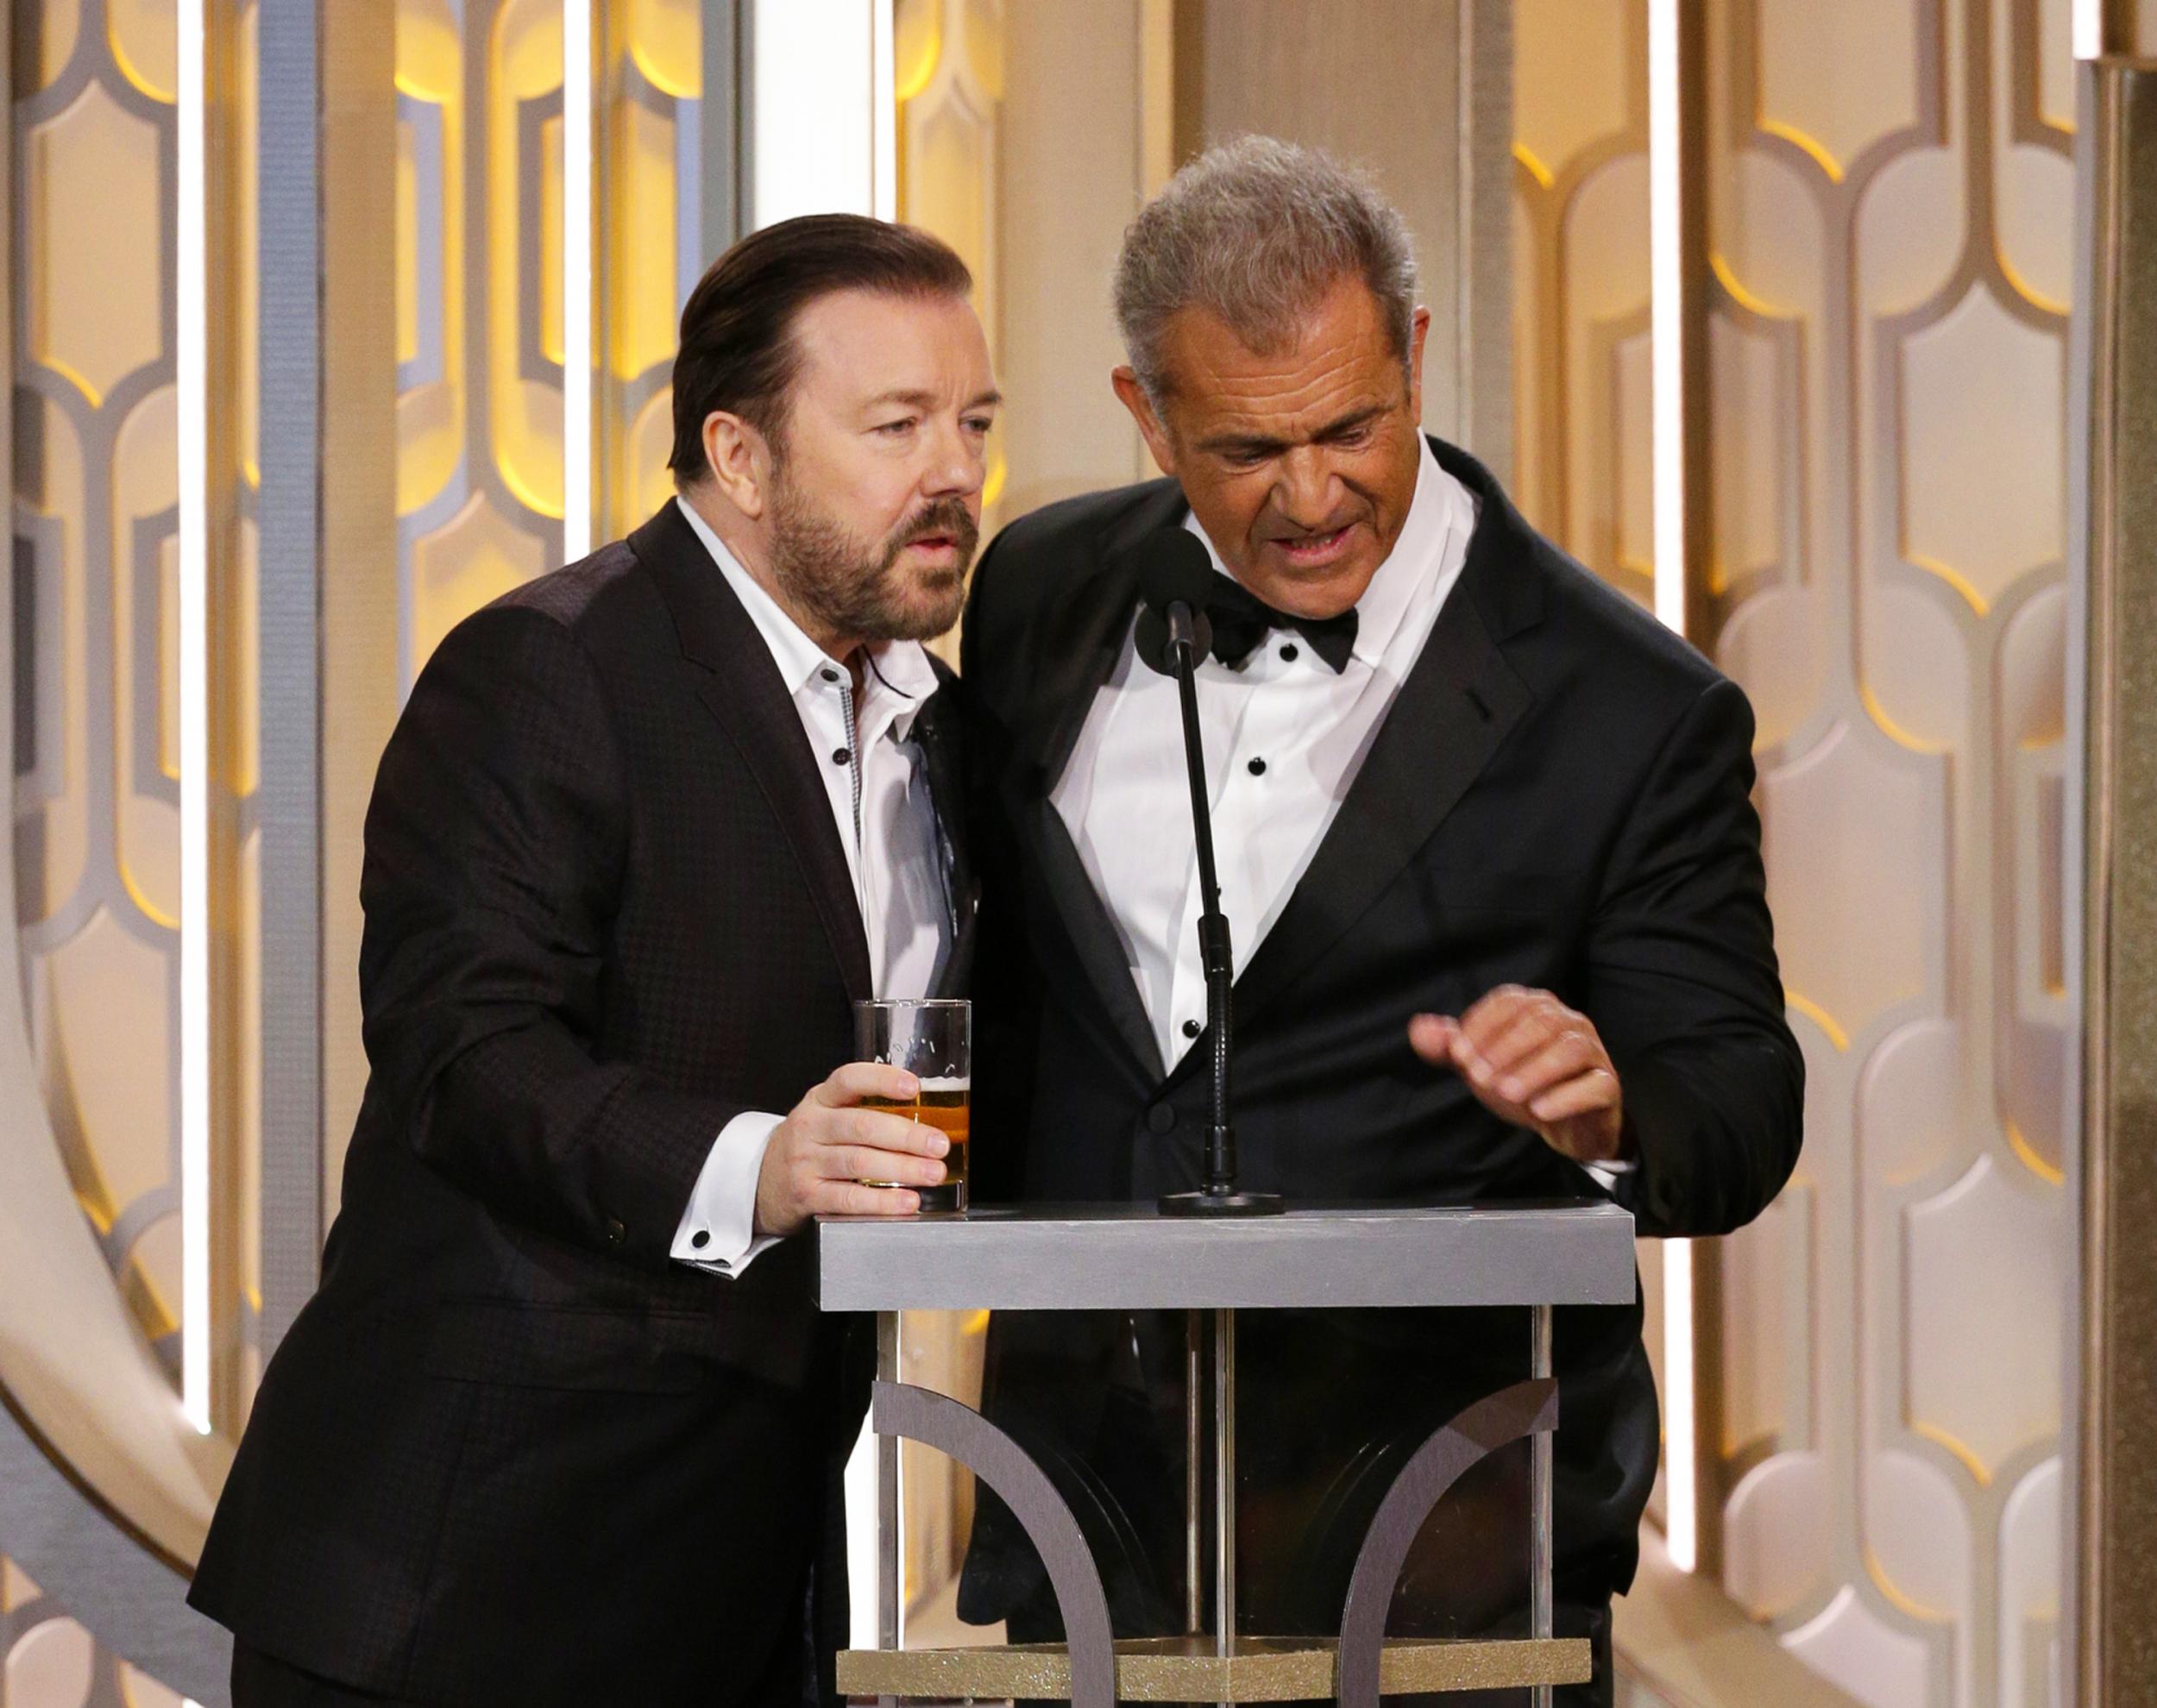 Host with the roast: Gervais interrupts Mel Gibson at the Golden Globes (AP)